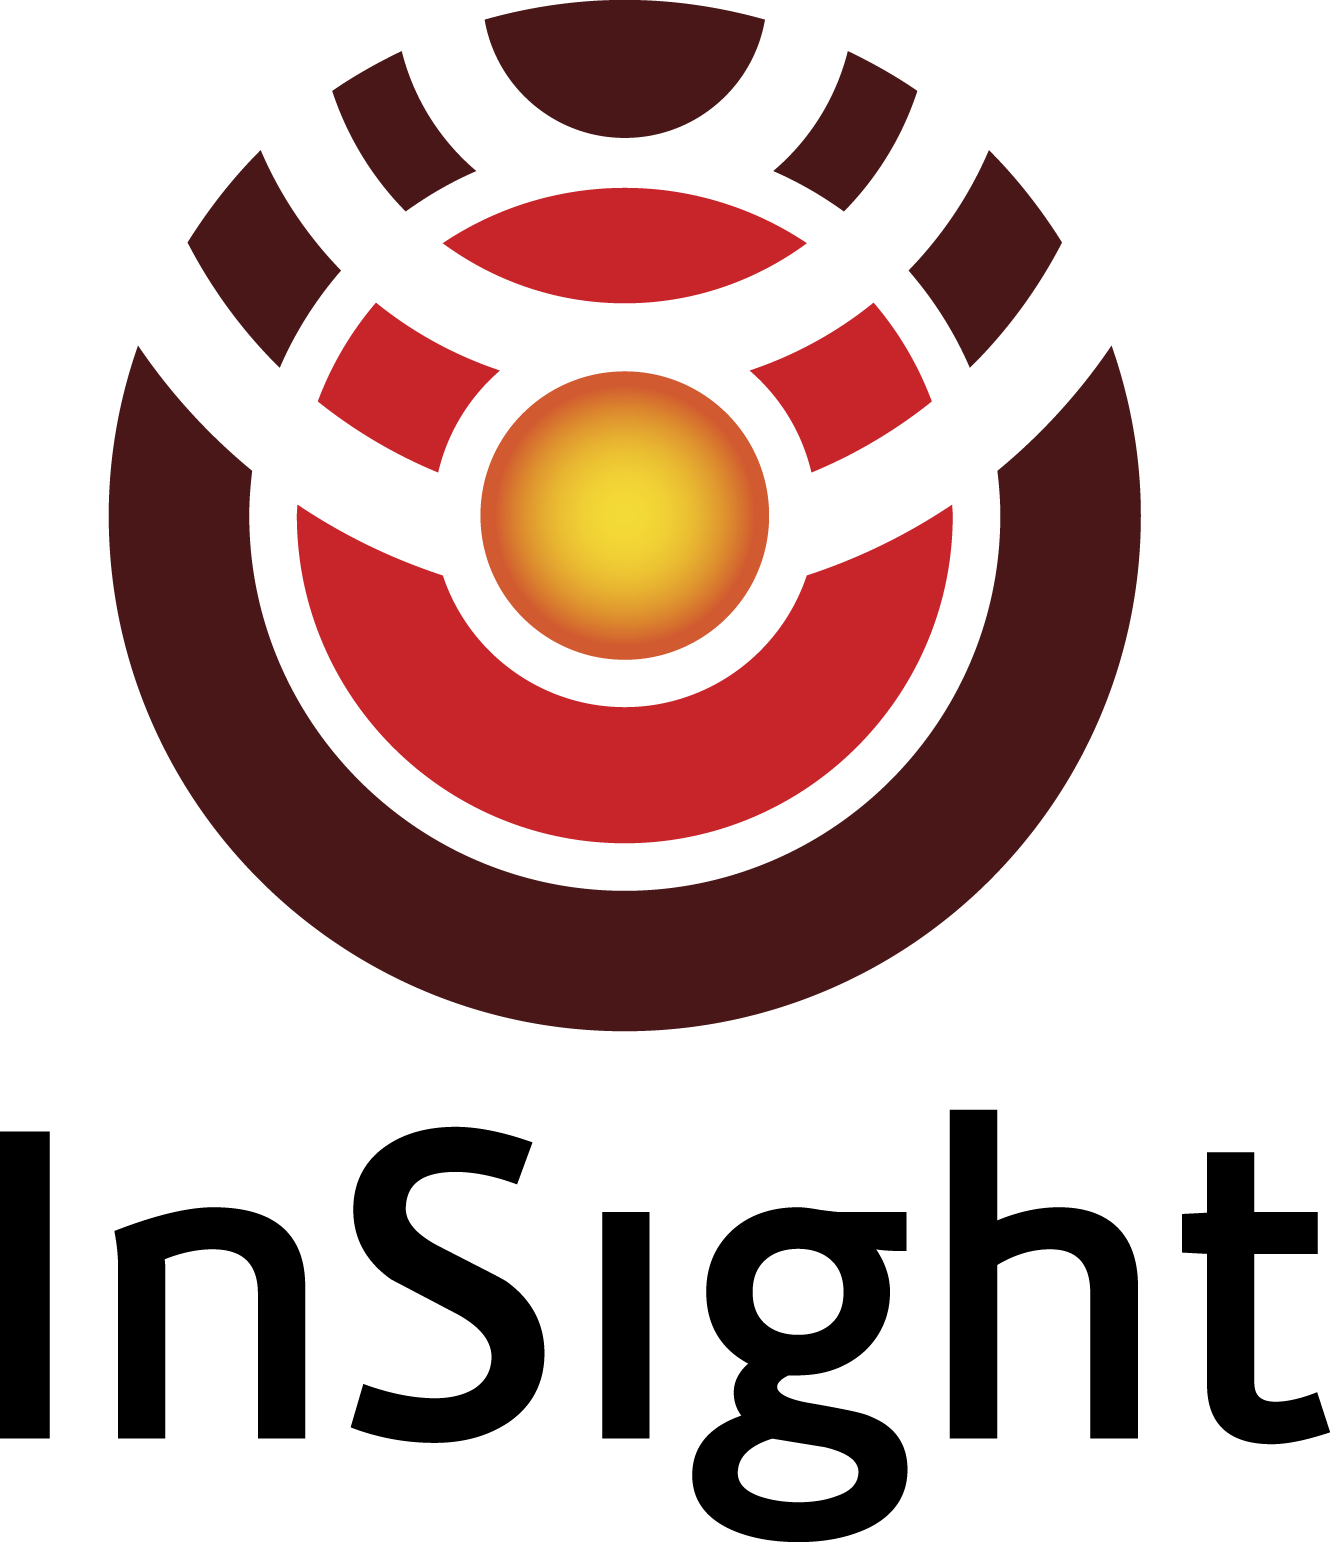 Insight Logo - File:InSight Mission Logo (transparent).png - Wikimedia Commons